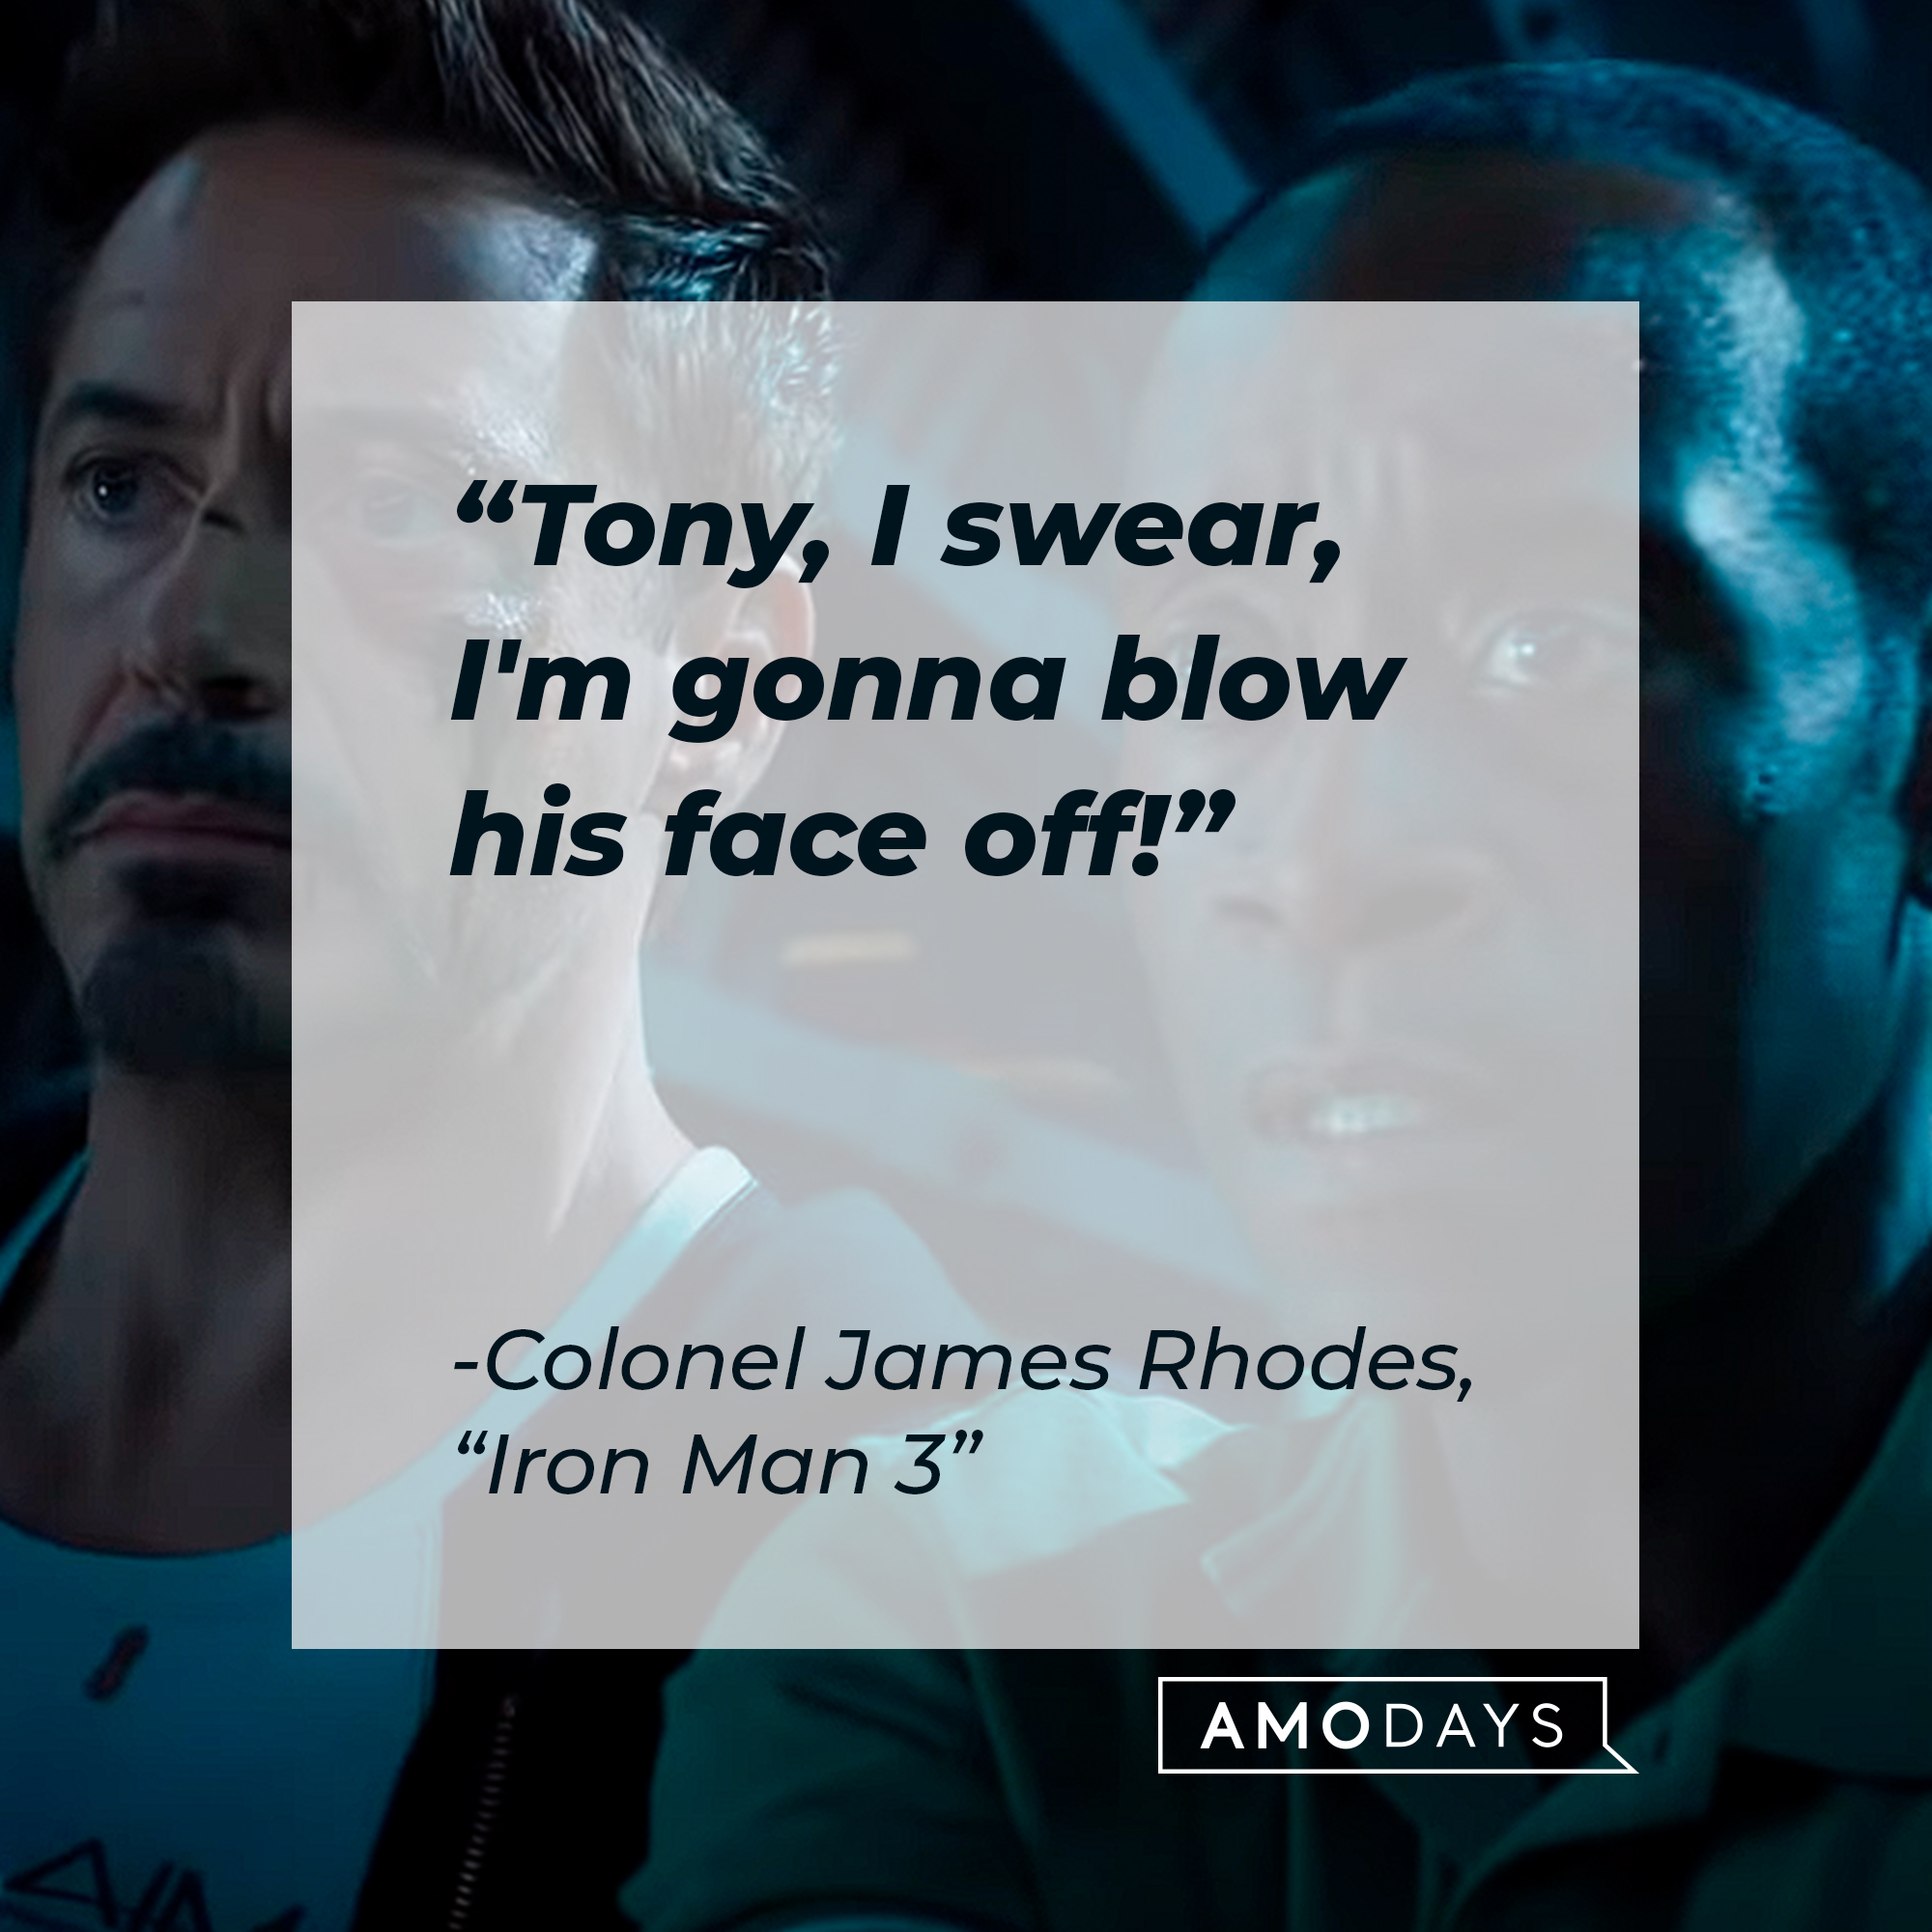 Colonel James Rhodes : "Tony, I swear, I'm gonna blow his face off!" | Image: AmoDays